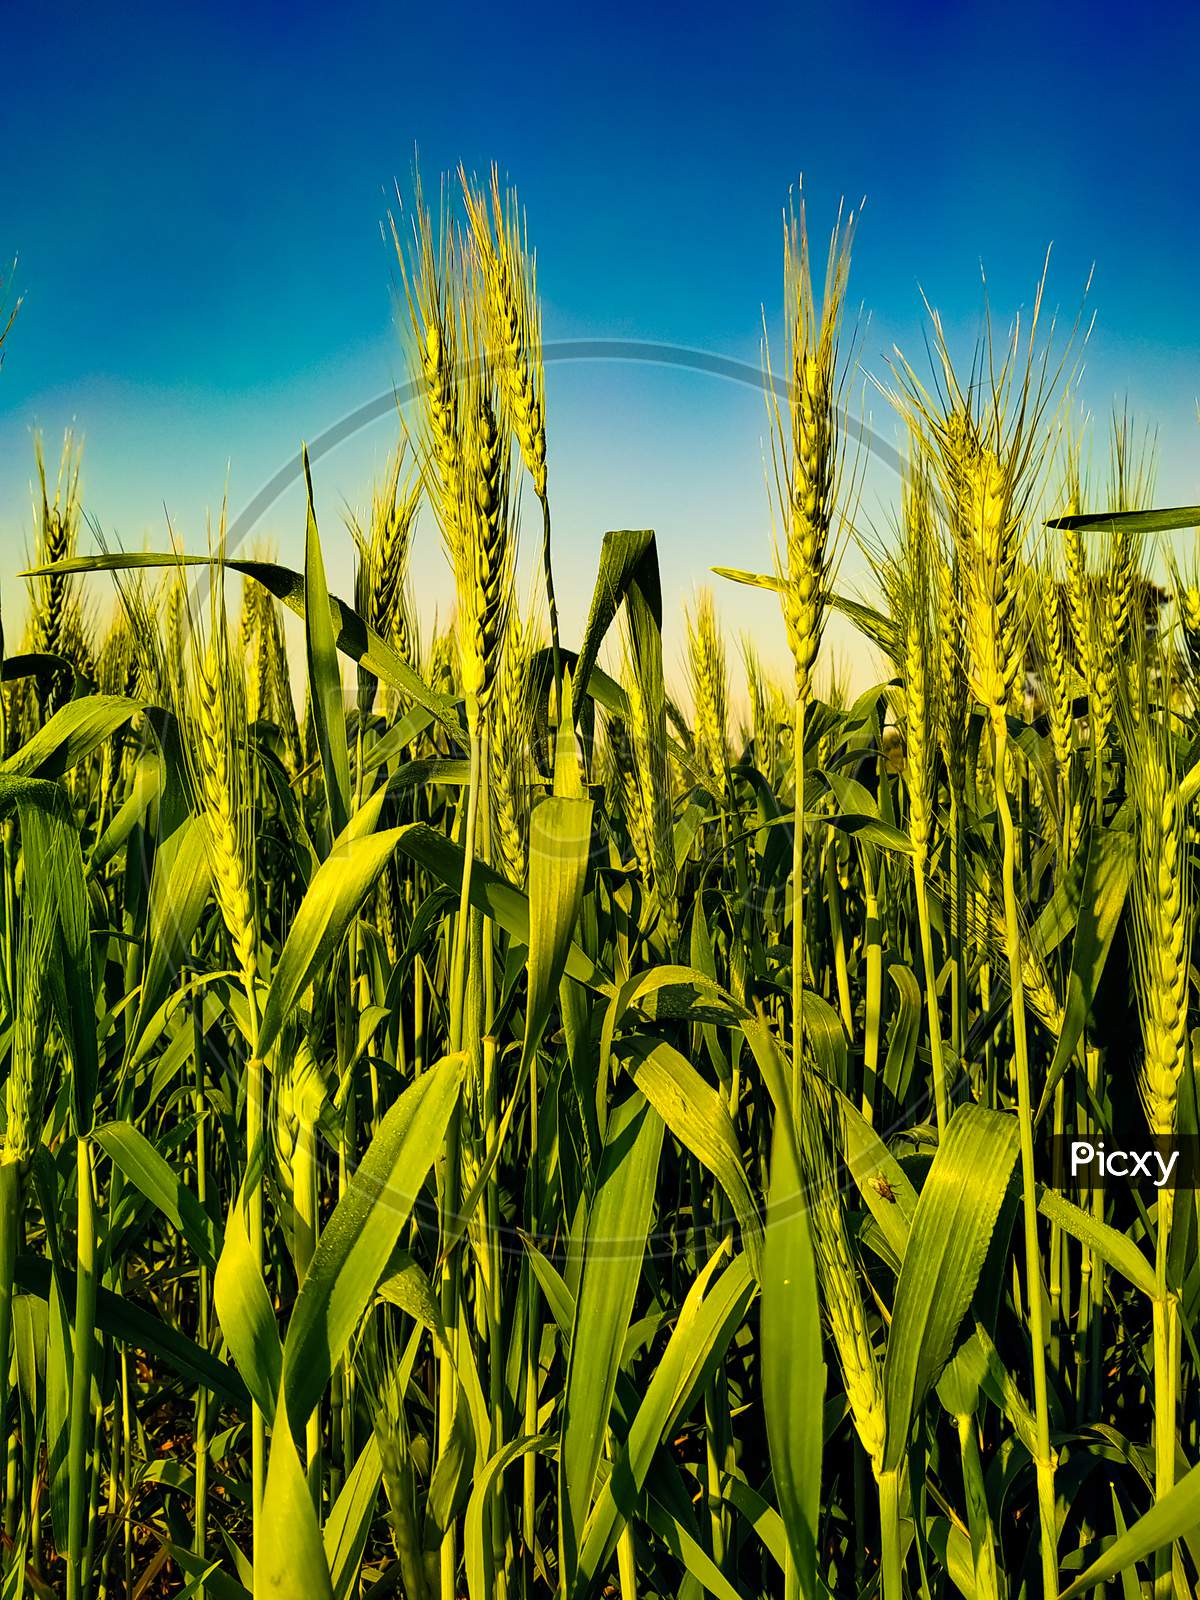 Close Up Growing Green Wheat Ears On The Blue Sky Background